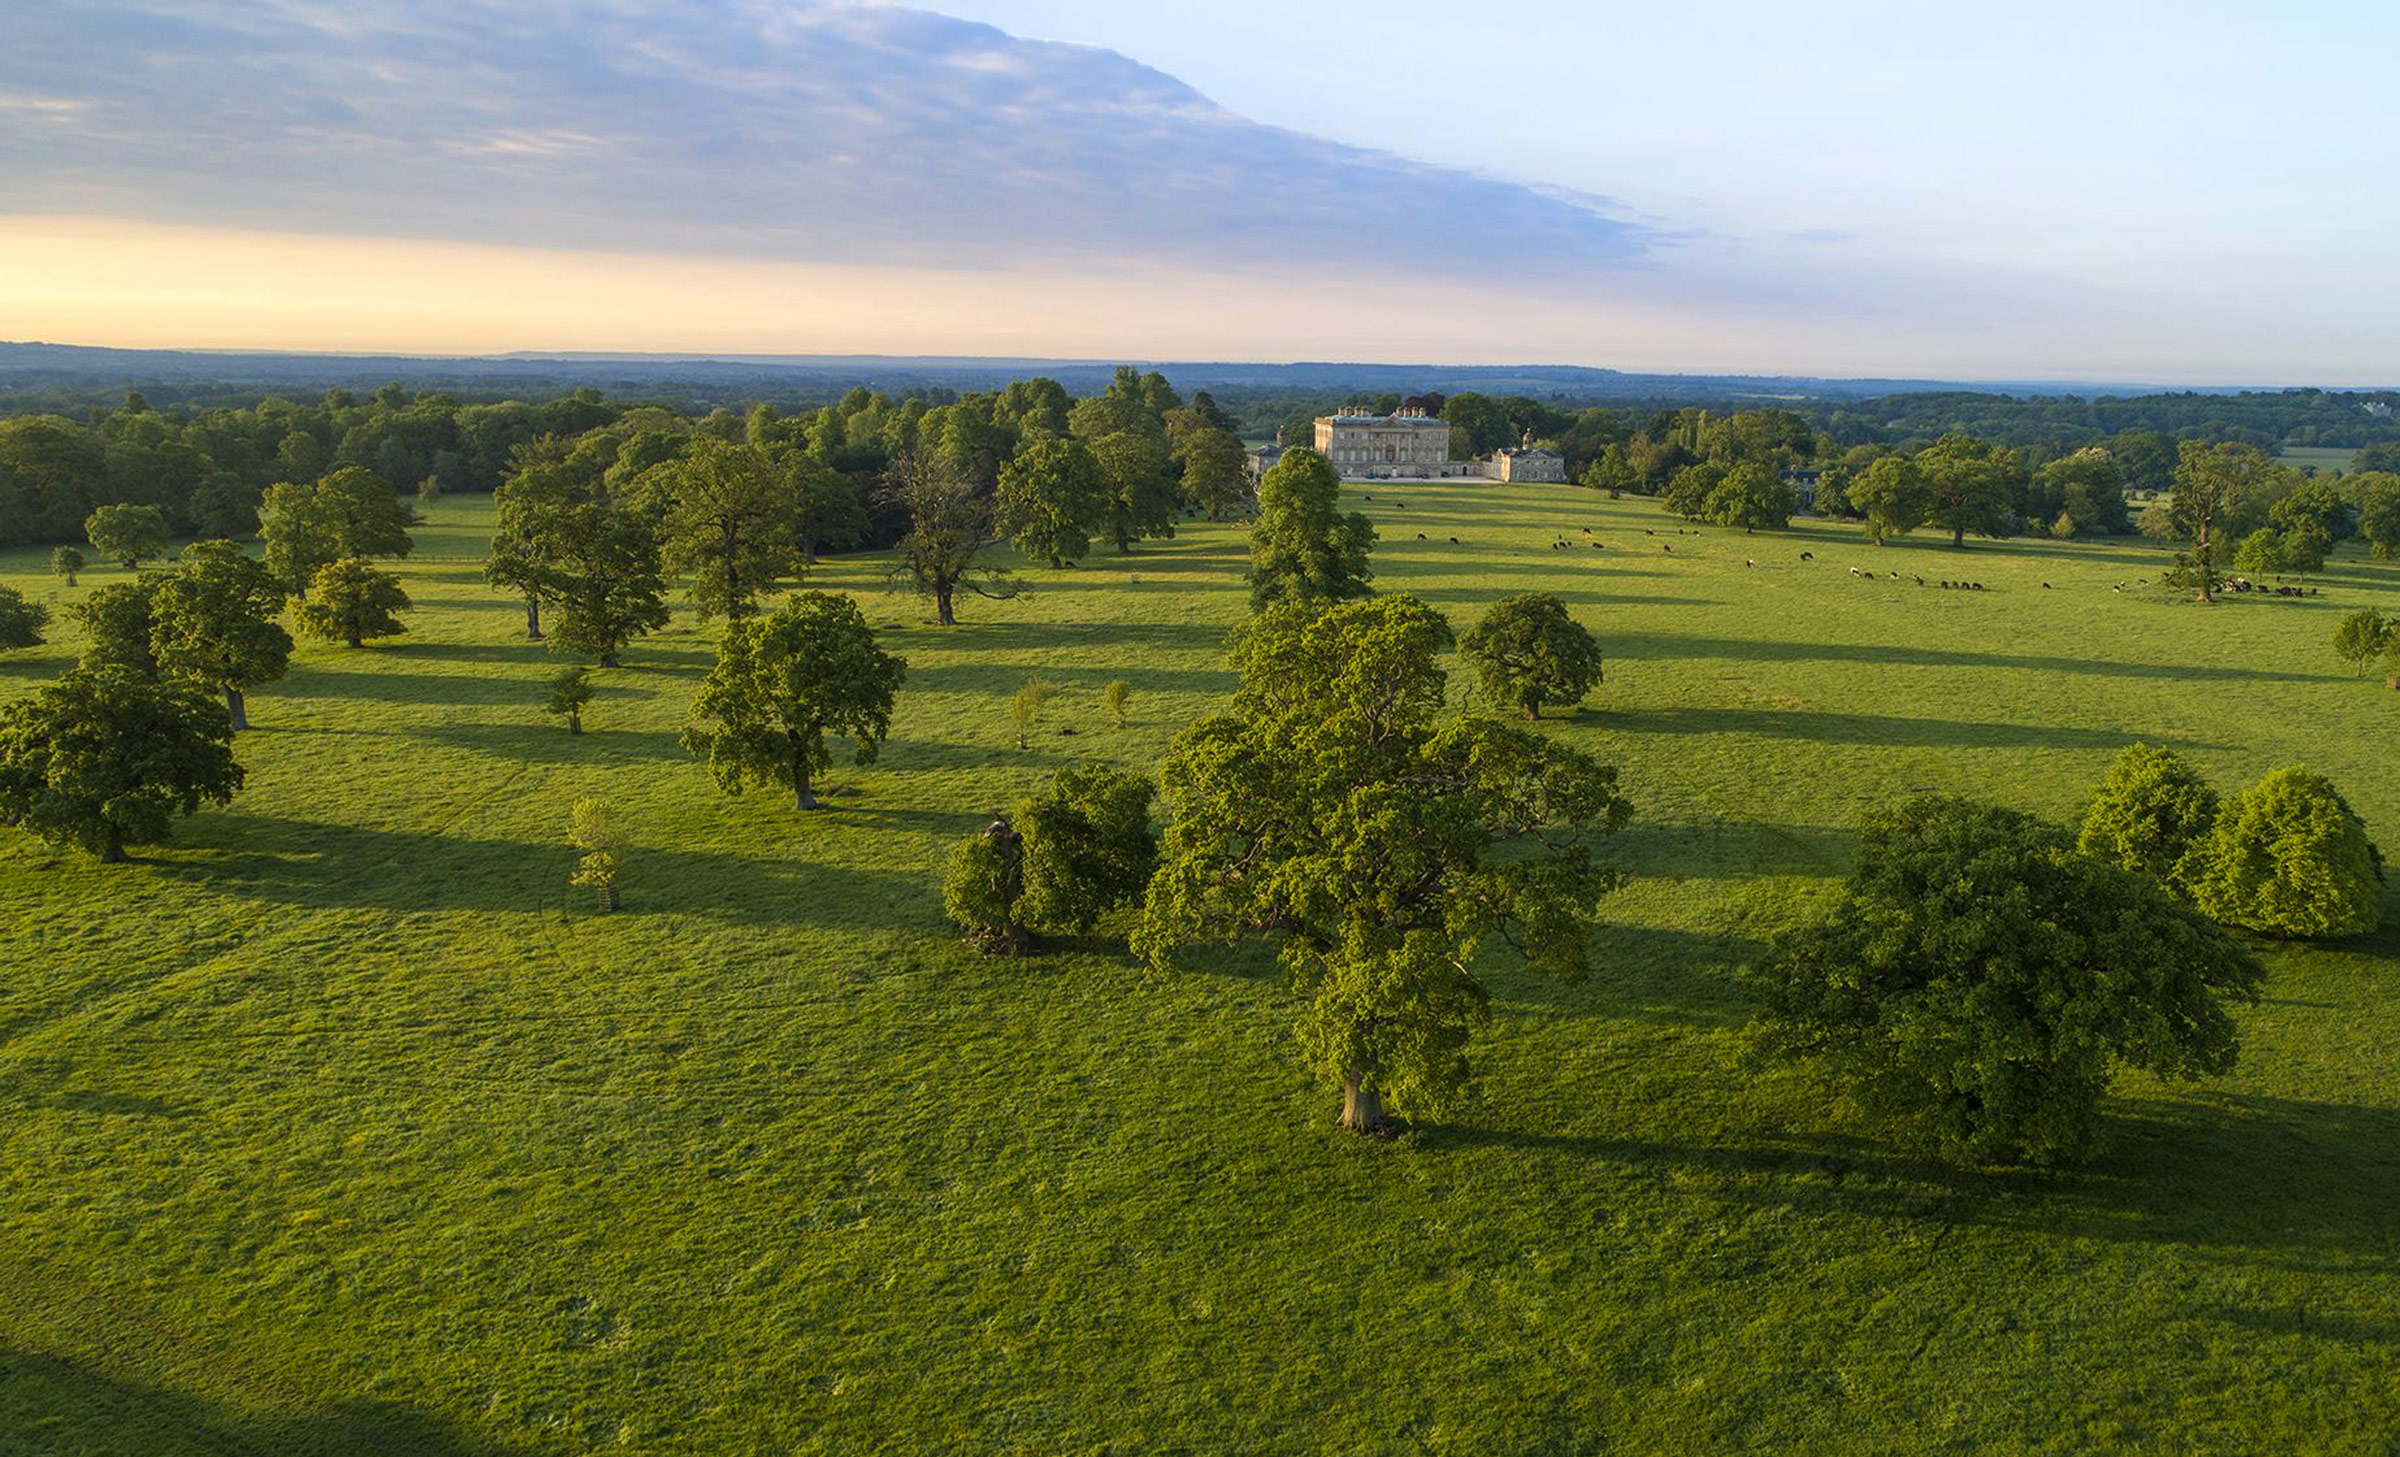 Trees, cattle grazing and far-reaching views within the Kirtlington Park Estate